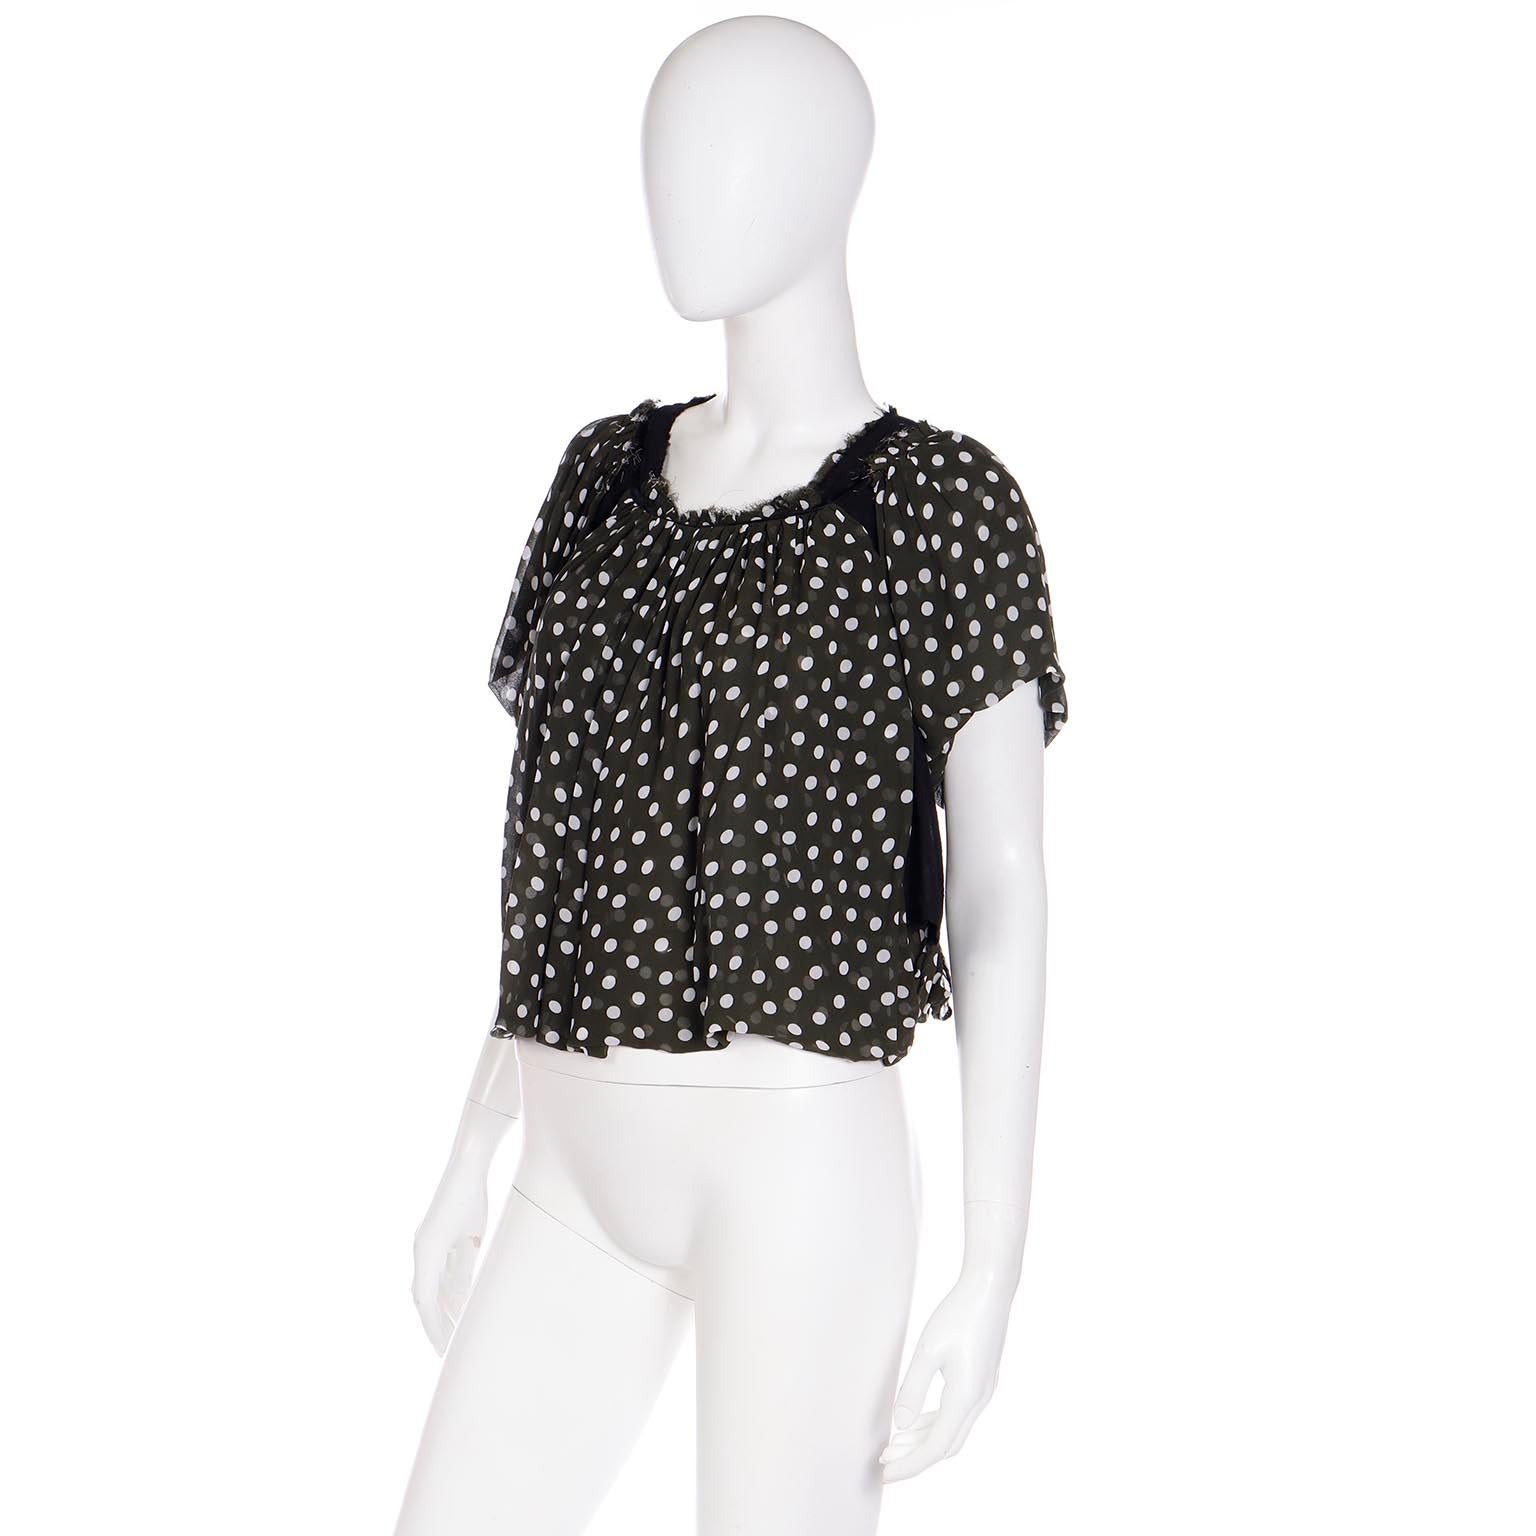 This is a fun Comme des Garcons deconstructed olive green polka dot cropped top, with pretty gathering at the neckline. We love Comme des garcons and this top has so much style and so many unique elements! Around the neckline there is also a black